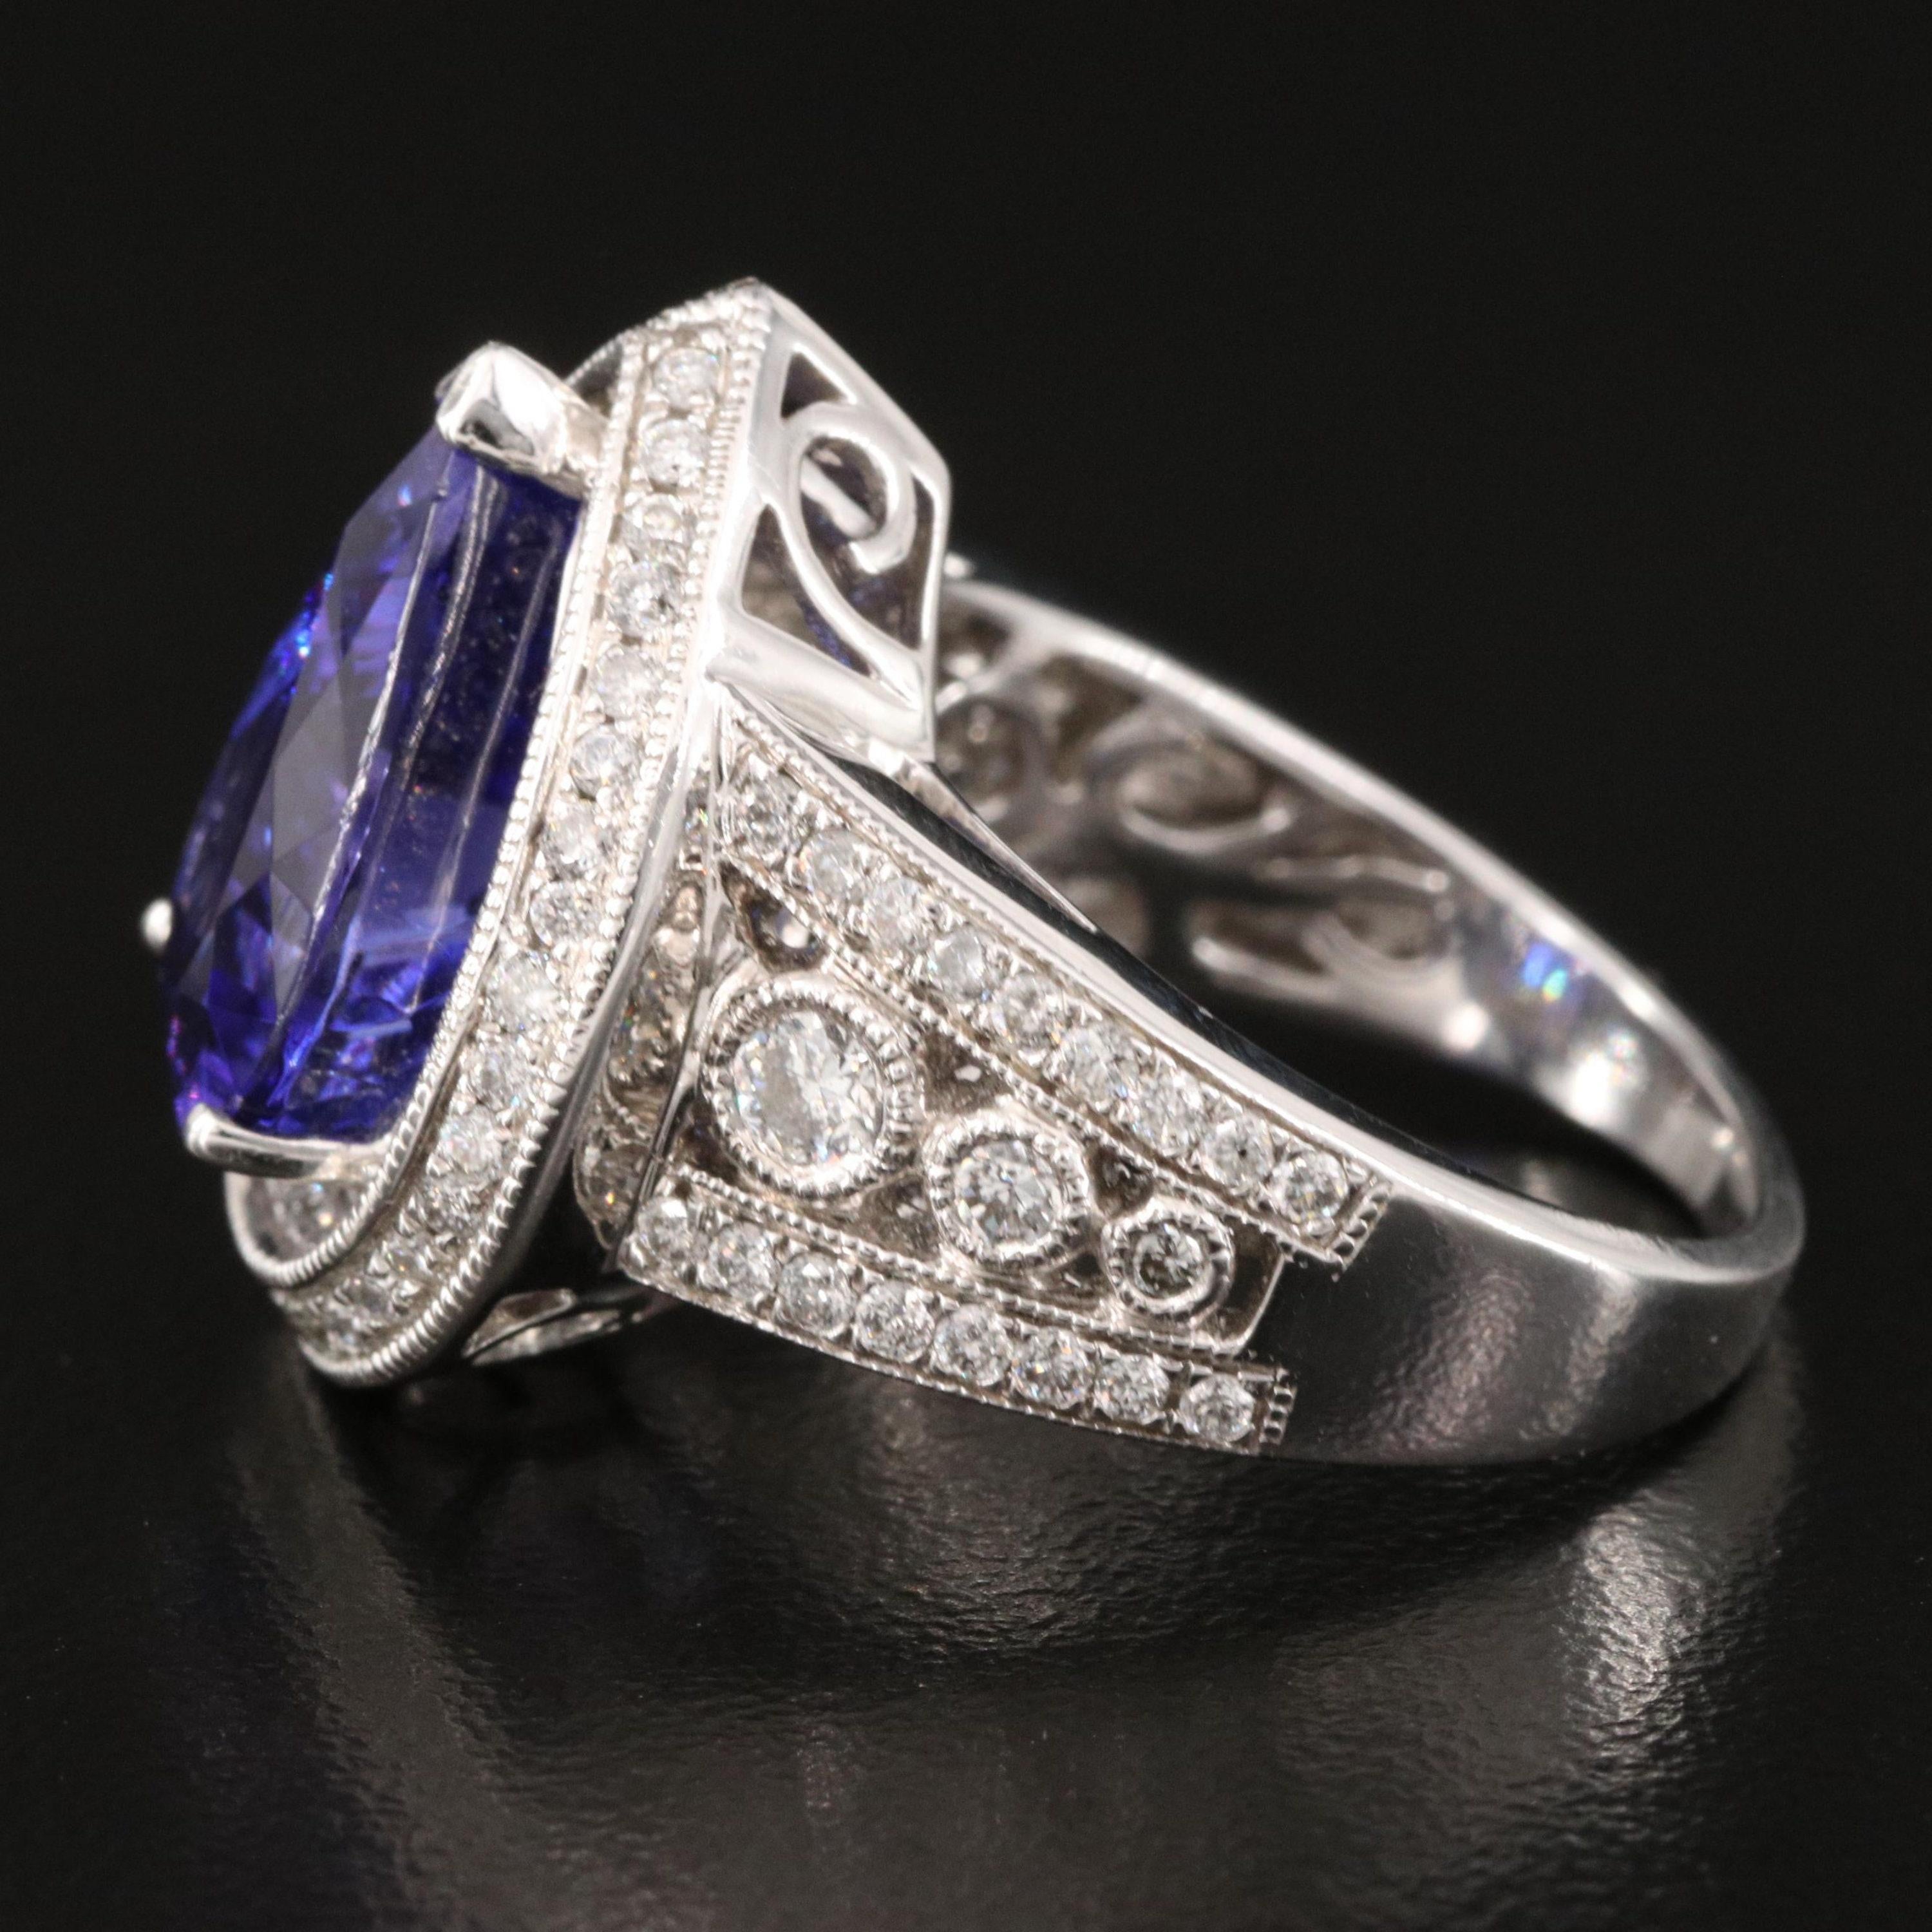 For Sale:  6.7 Carat Art Deco Pear Cut Tanzanite Engagement Ring White Gold Wedding Ring 3